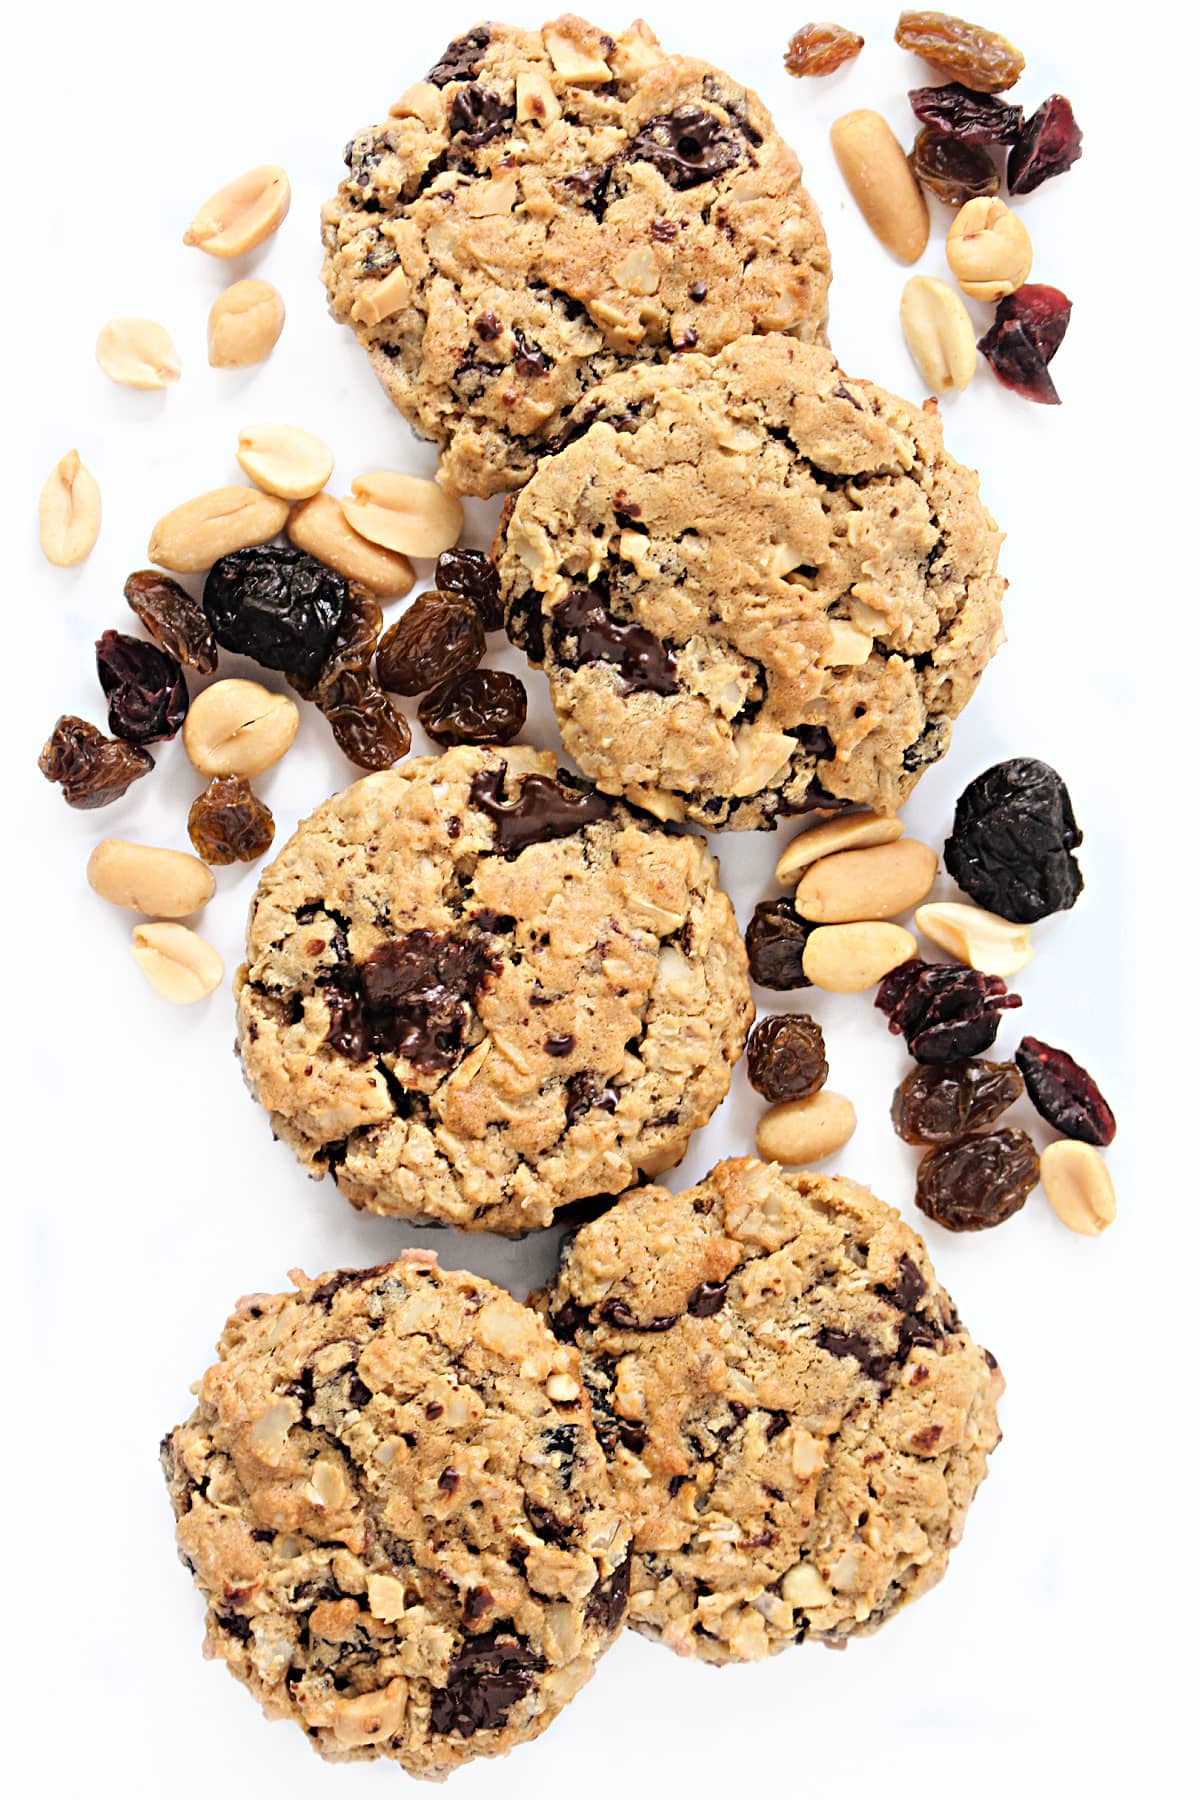 Craggy oatmeal cookies with bits of peanuts and melted chocolate.